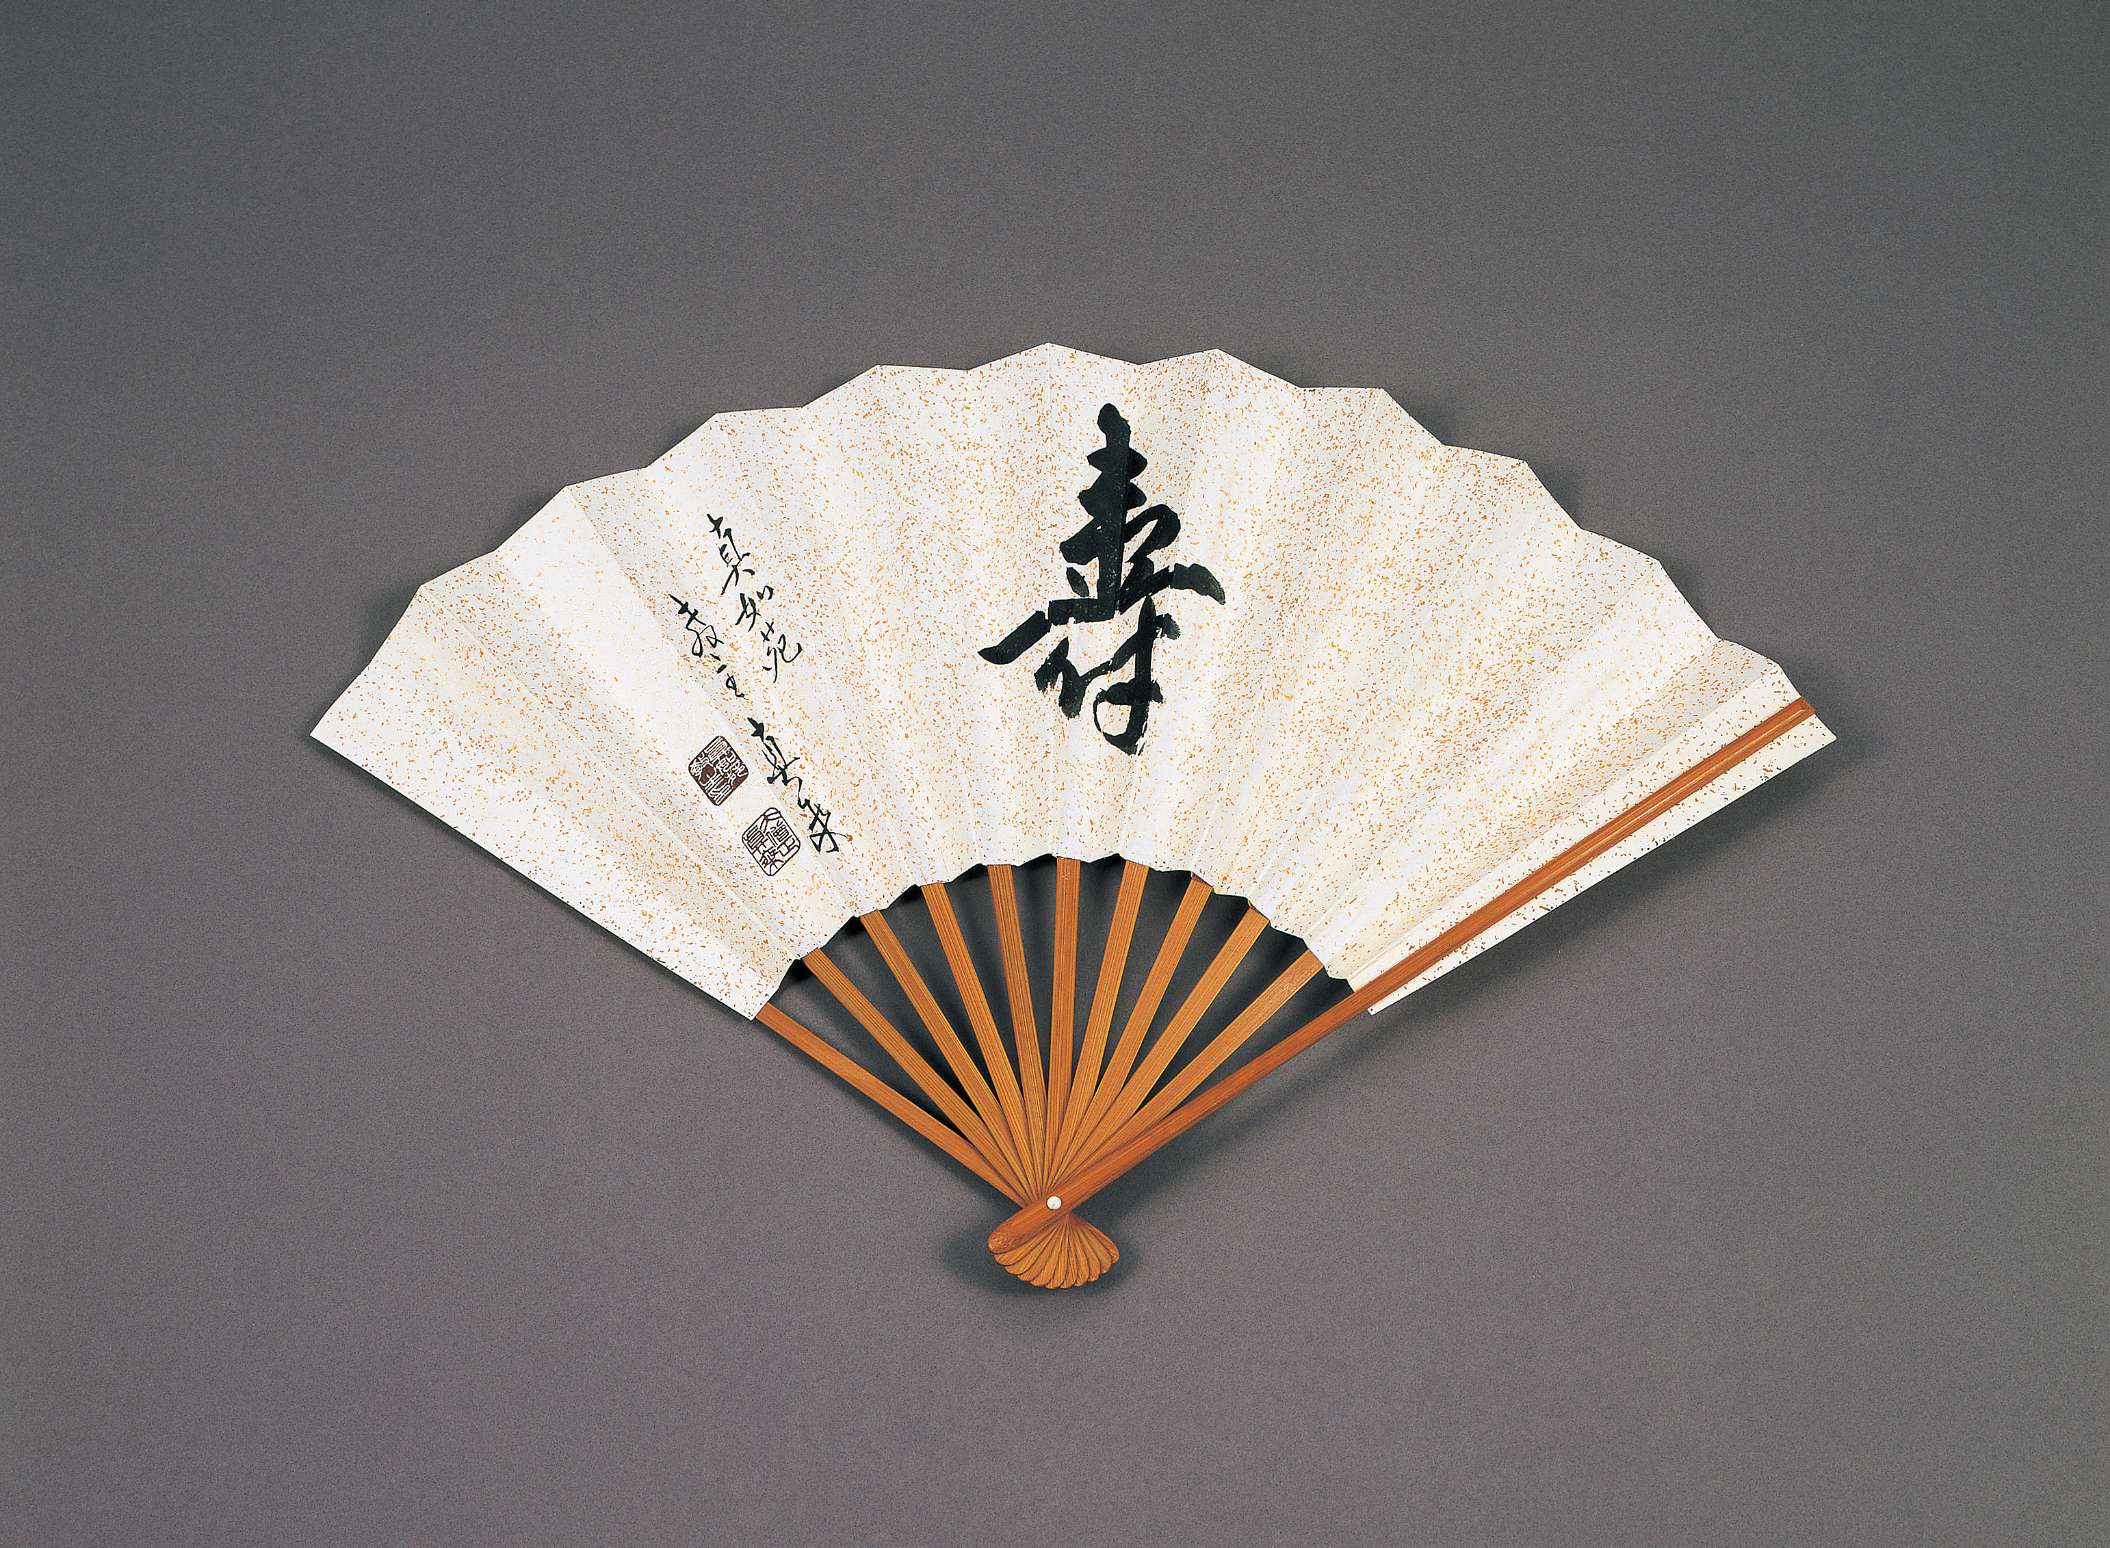 A large Japanese character is written with brush and ink on an opened paper folding fan. Two smaller lines of calligraphy are written to the left, with two black stamp impressions.